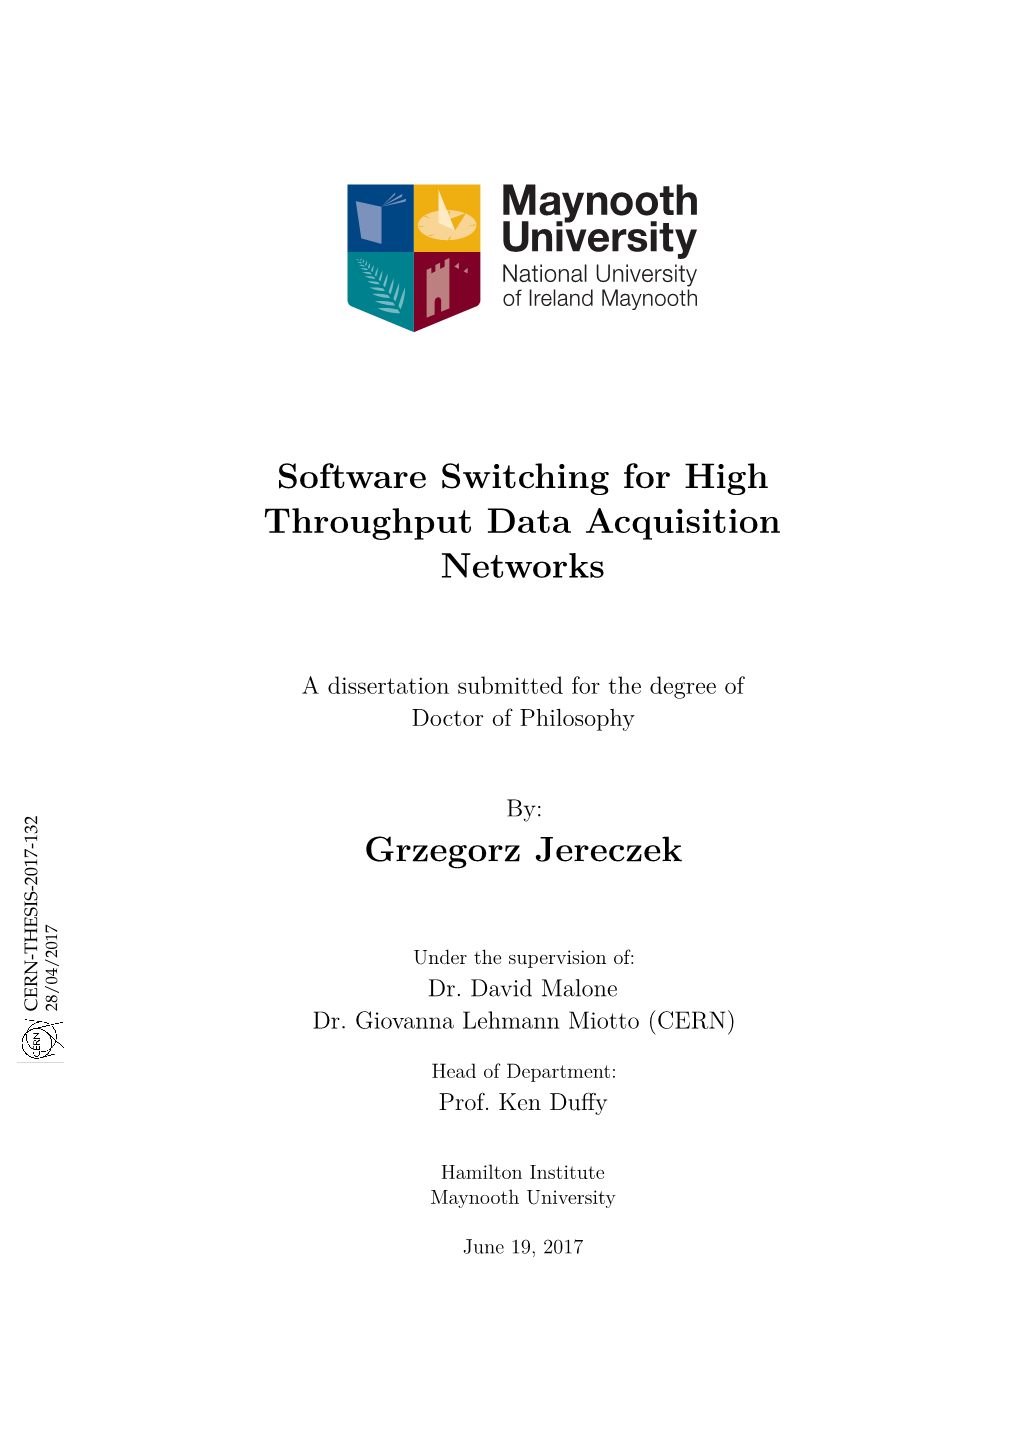 Software Switching for High Throughput Data Acquisition